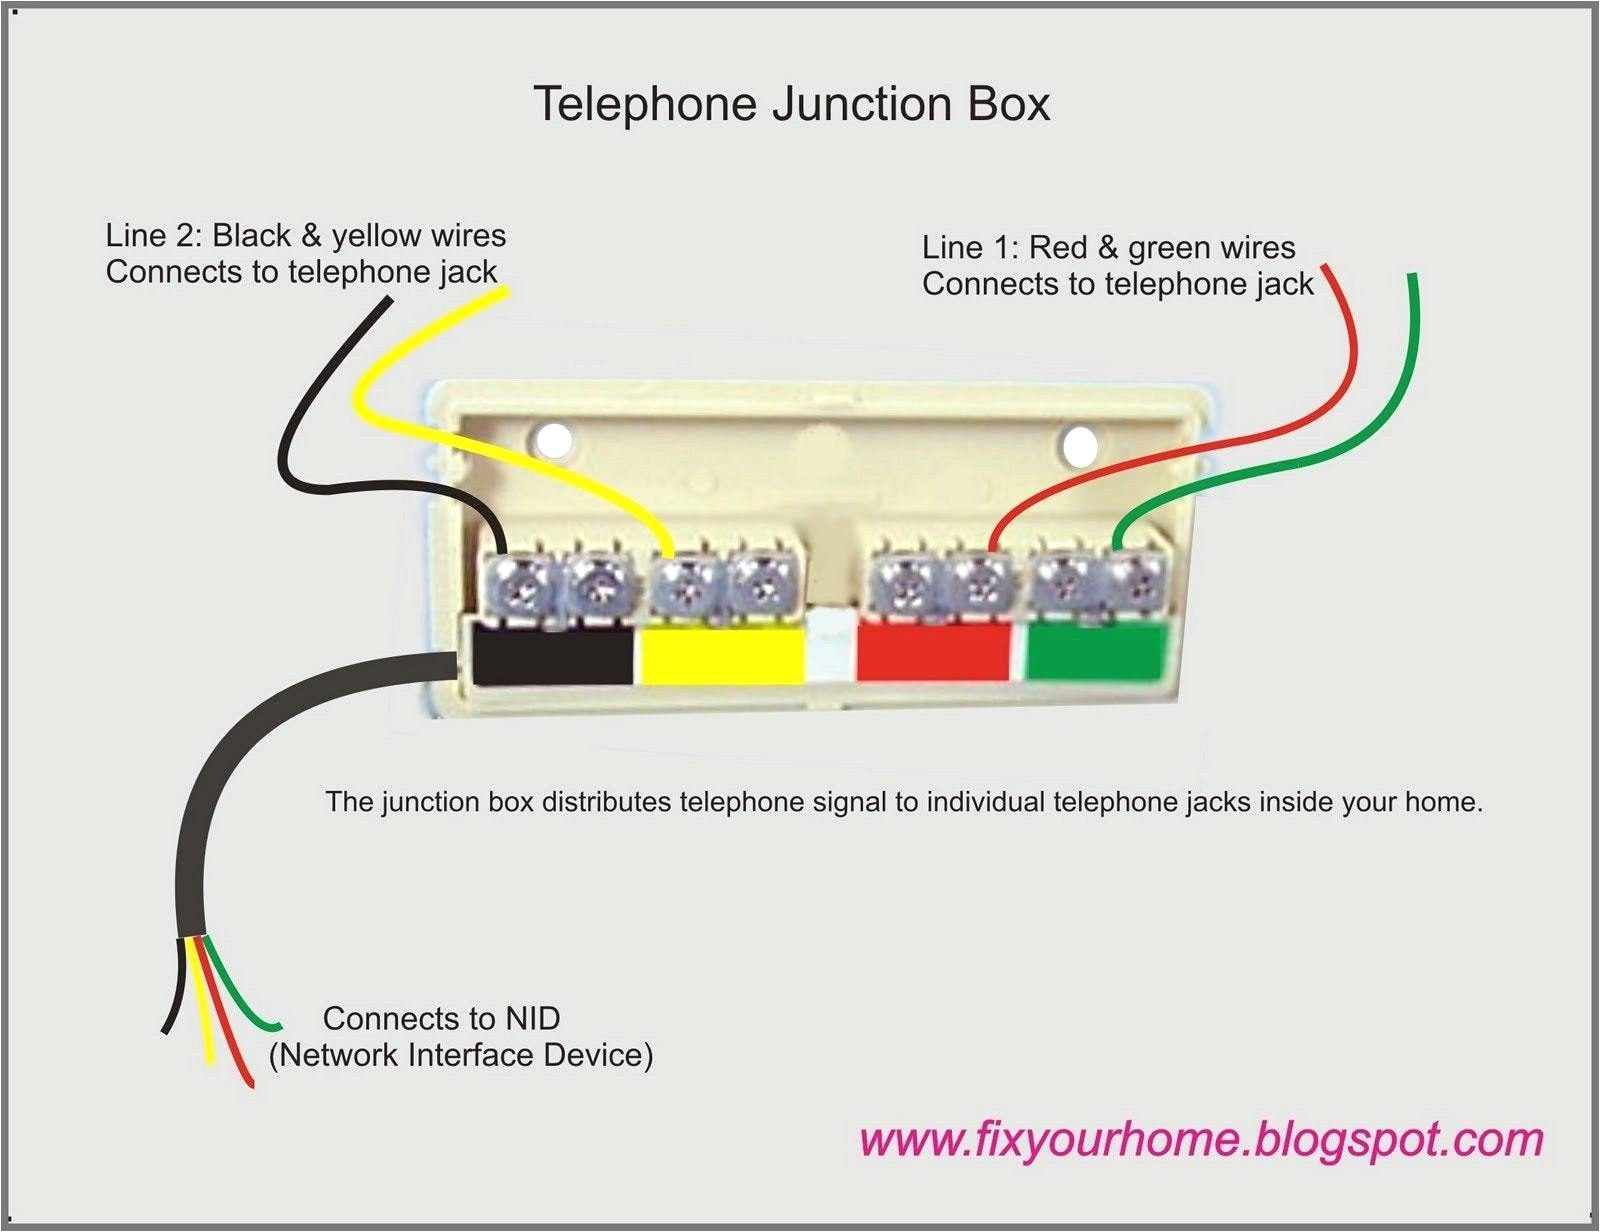 phone booth wiring diagram wiring diagrams phone booth wiring diagram wiring diagram for you phone booth